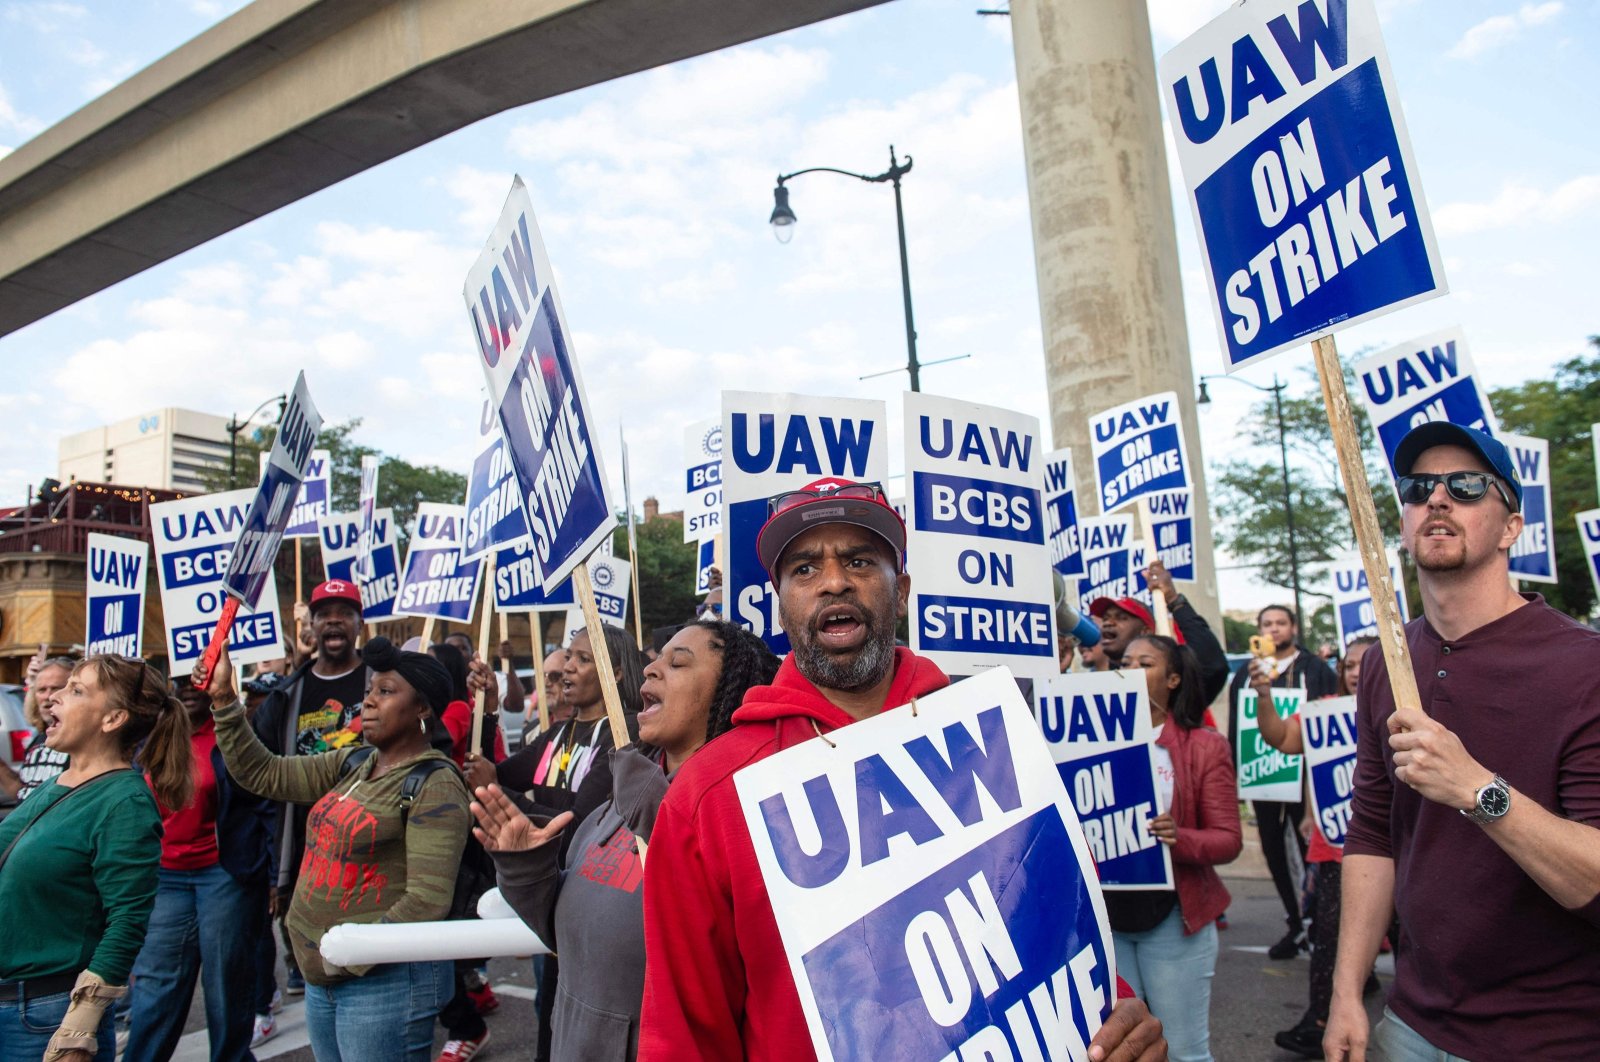 Blue Cross Blue Shield employees show their support to members of the United Auto Workers (UAW) union as they march through the streets of downtown Detroit following a rally on the first day of the UAW strike in Detroit, Michigan, U.S., Sept. 15, 2023. (AFP Photo)